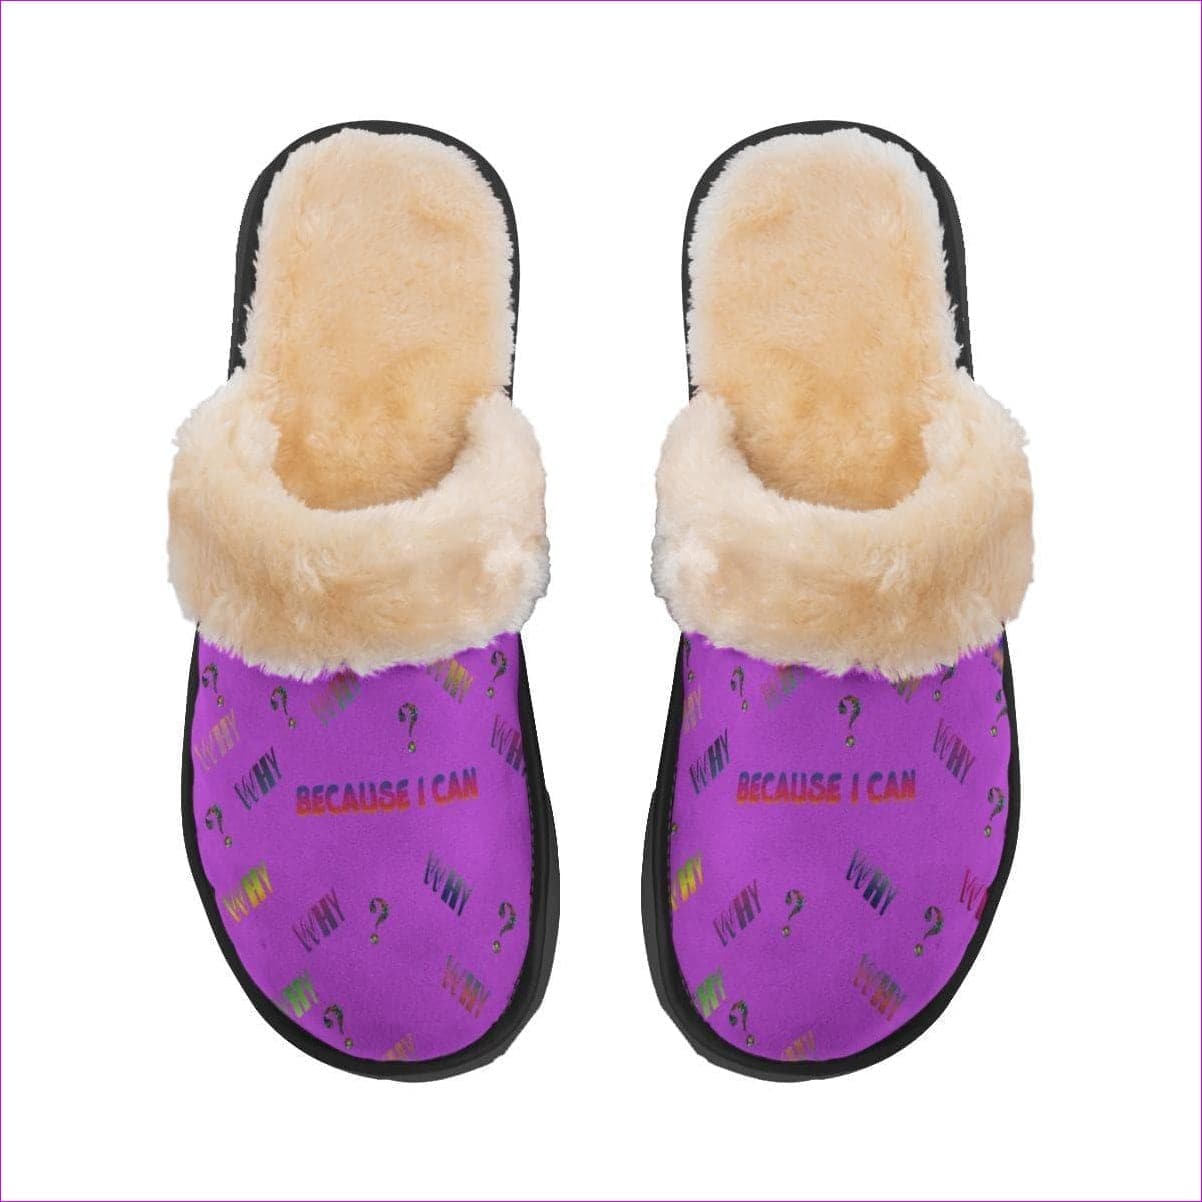 Women's "Because I Can" Home Plush Slippers - women's slippers at TFC&H Co.